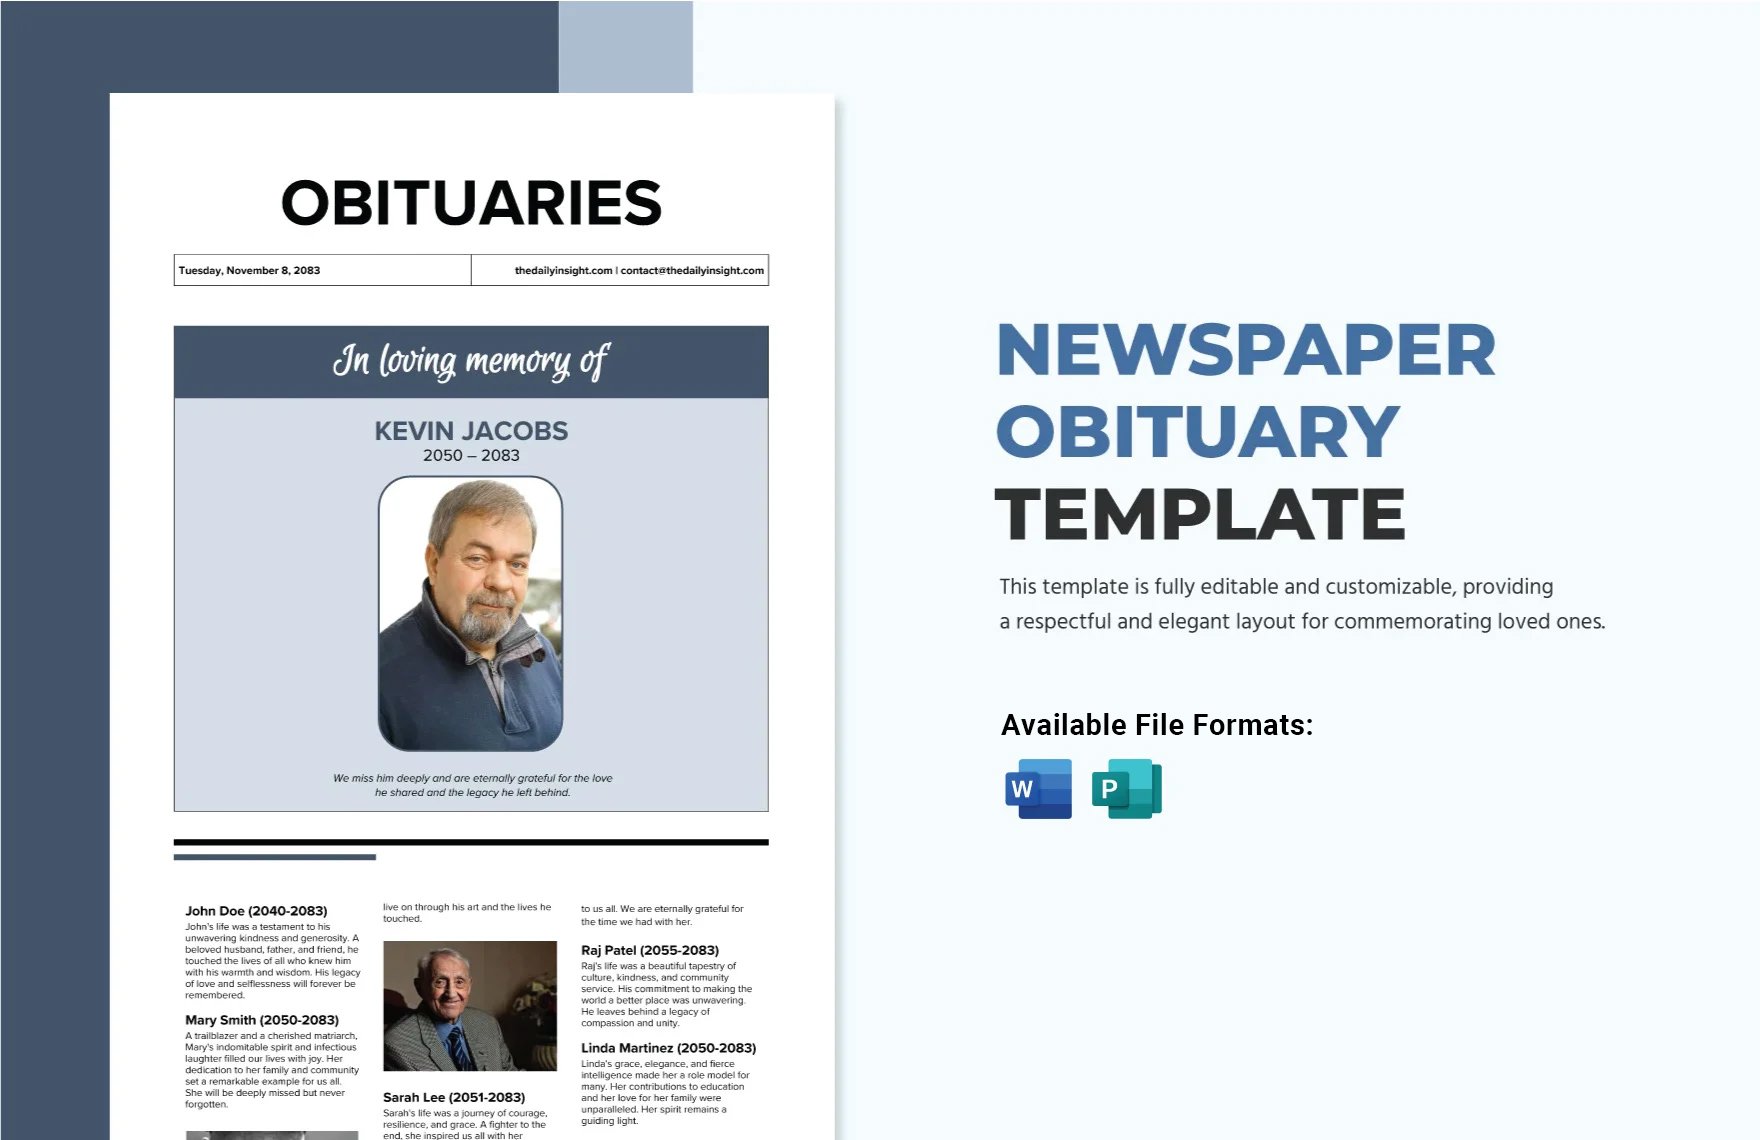 Free Newspaper Obituary Template in Word, Publisher